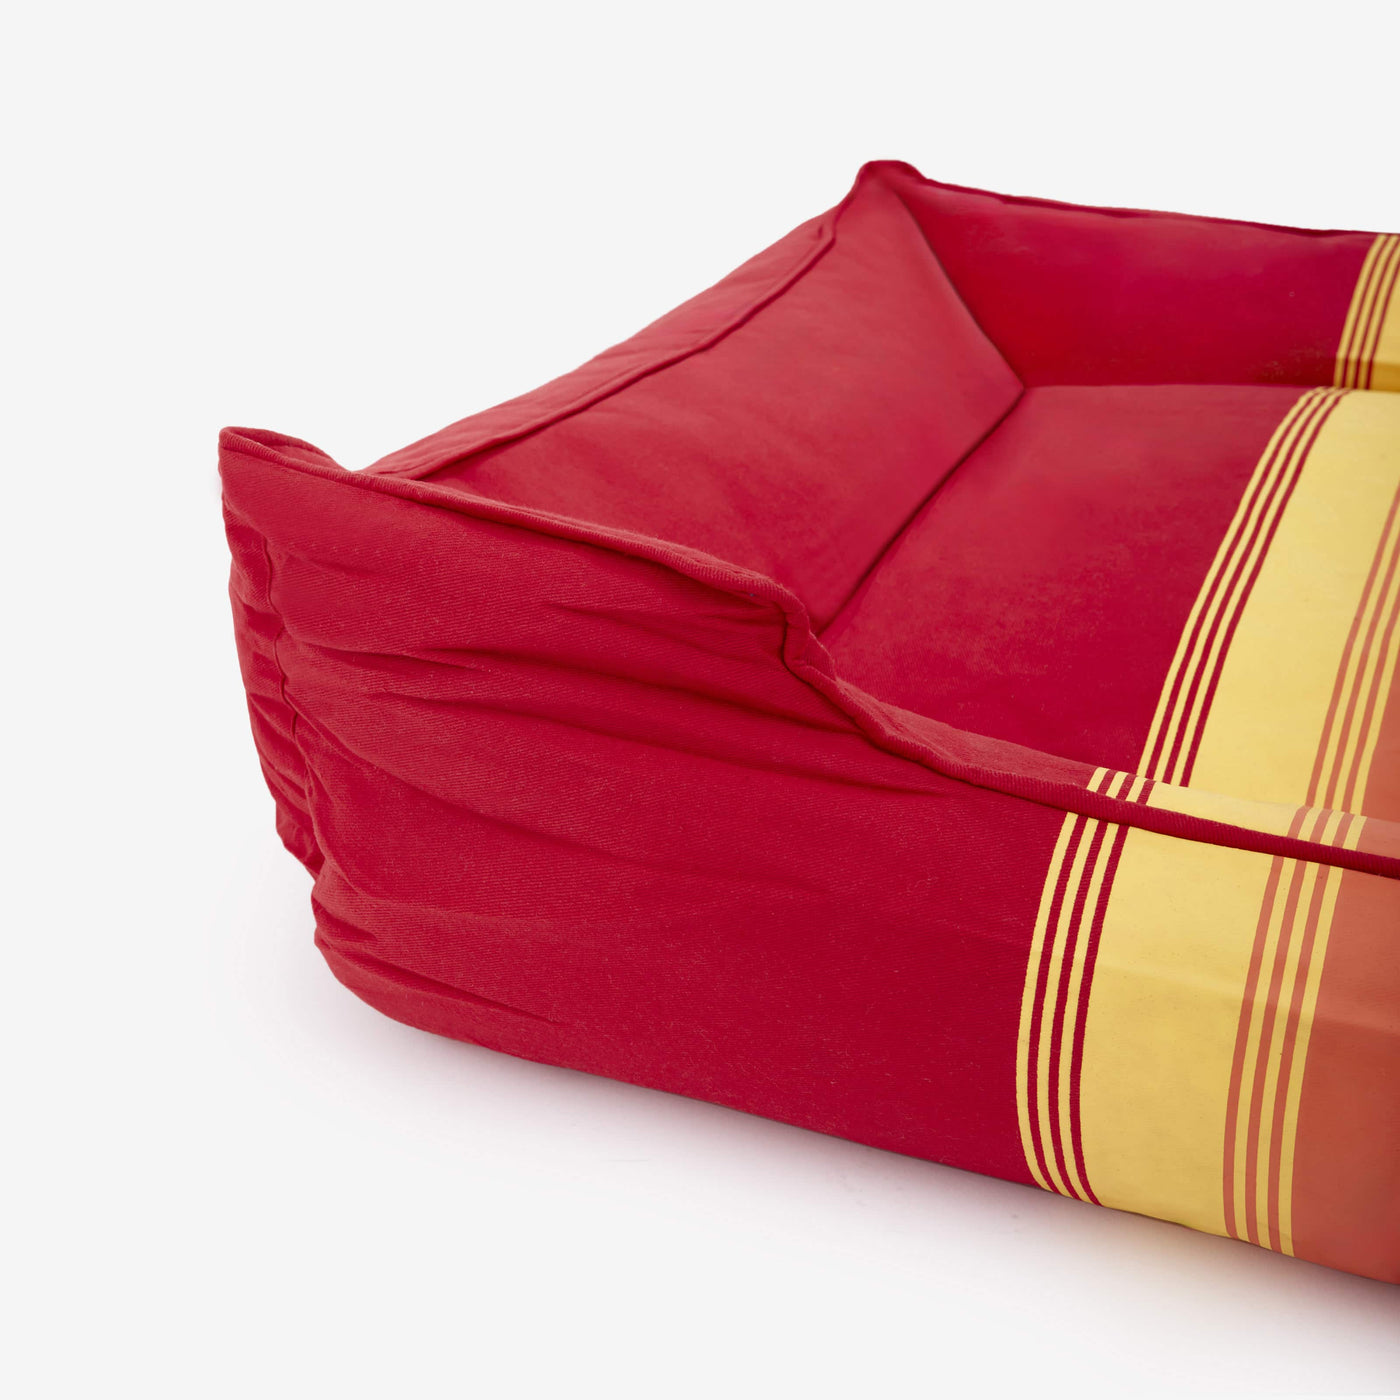 Woofoo Striped Water Repellant Pet Bed, Red, Medium Pet Beds sazy.com